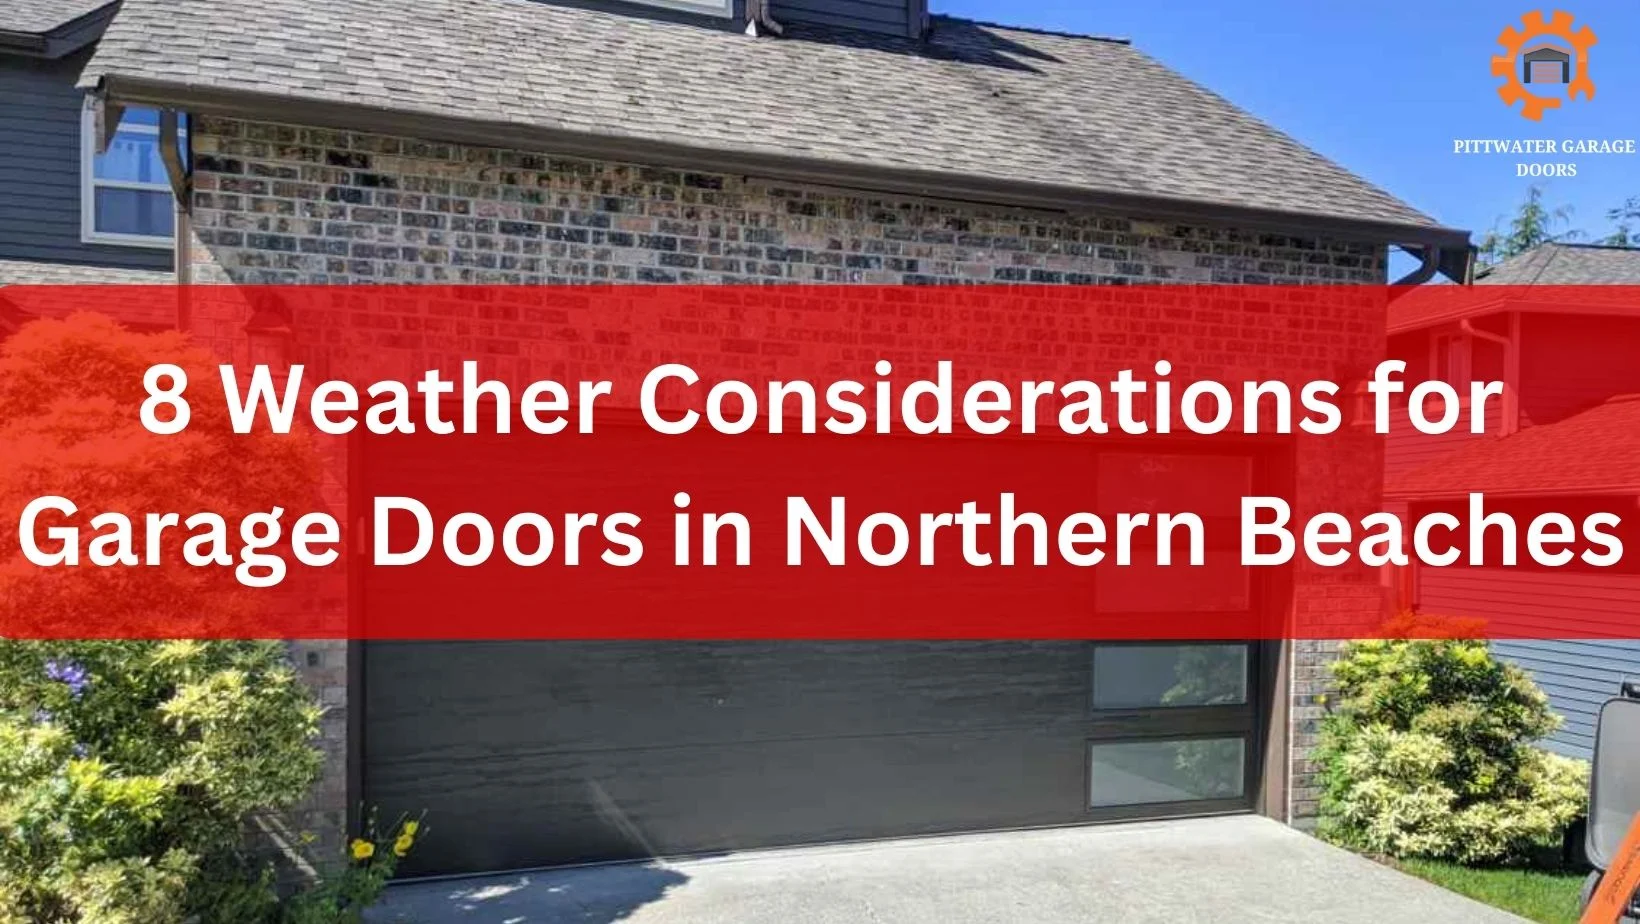 Weather Considerations for Garage Doors in Northern Beaches